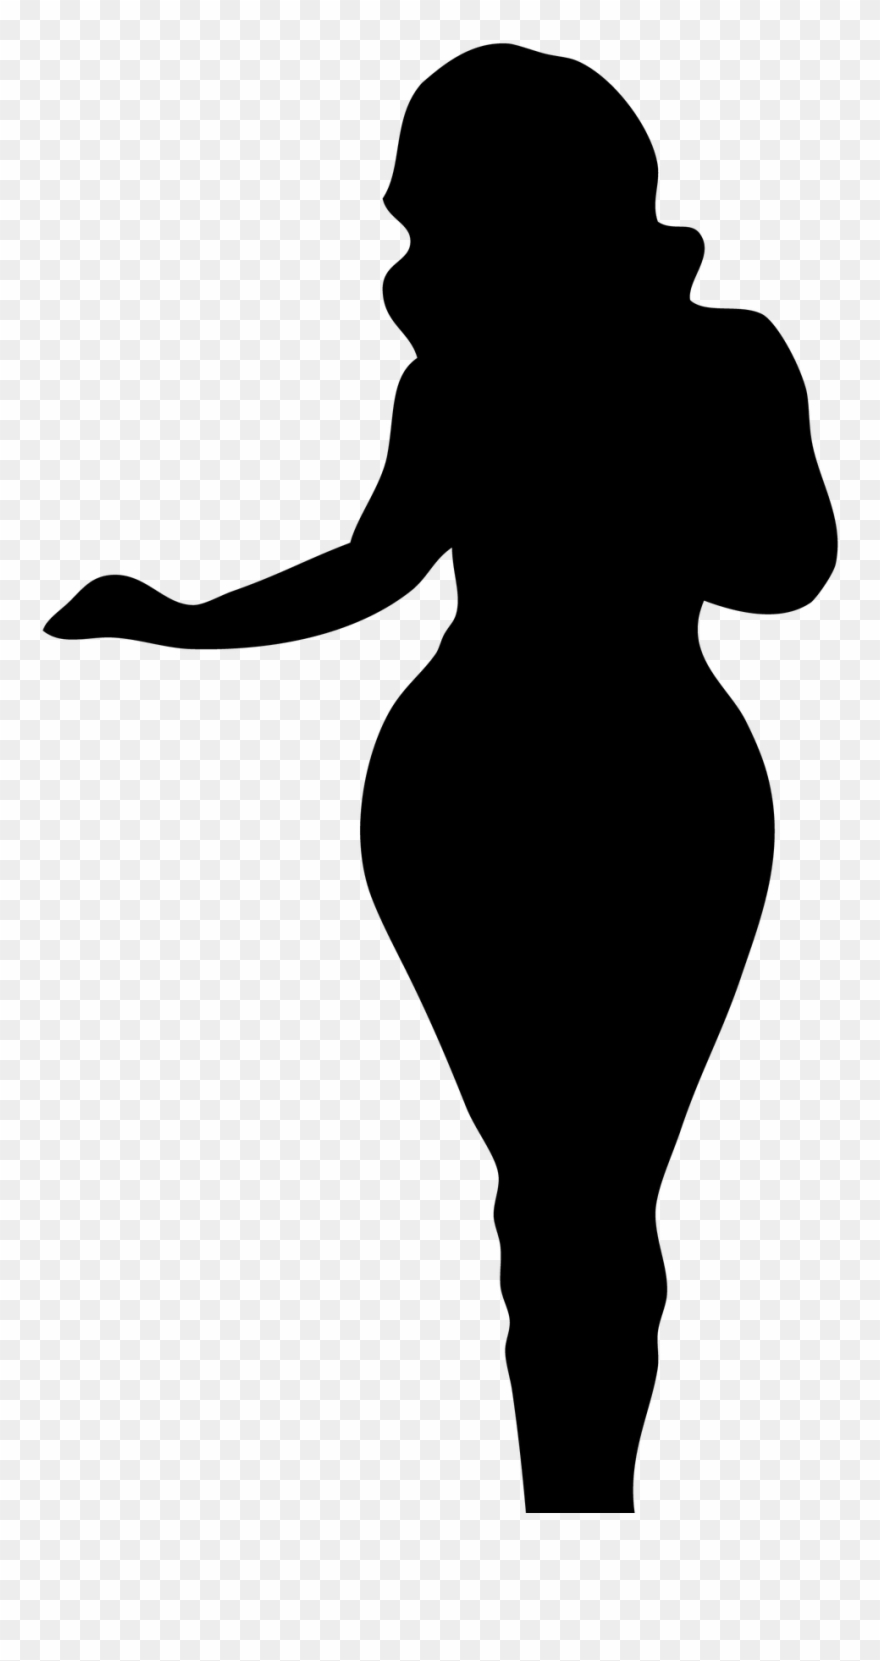 African Woman Silhouette Clip Art Free - kulturaupice